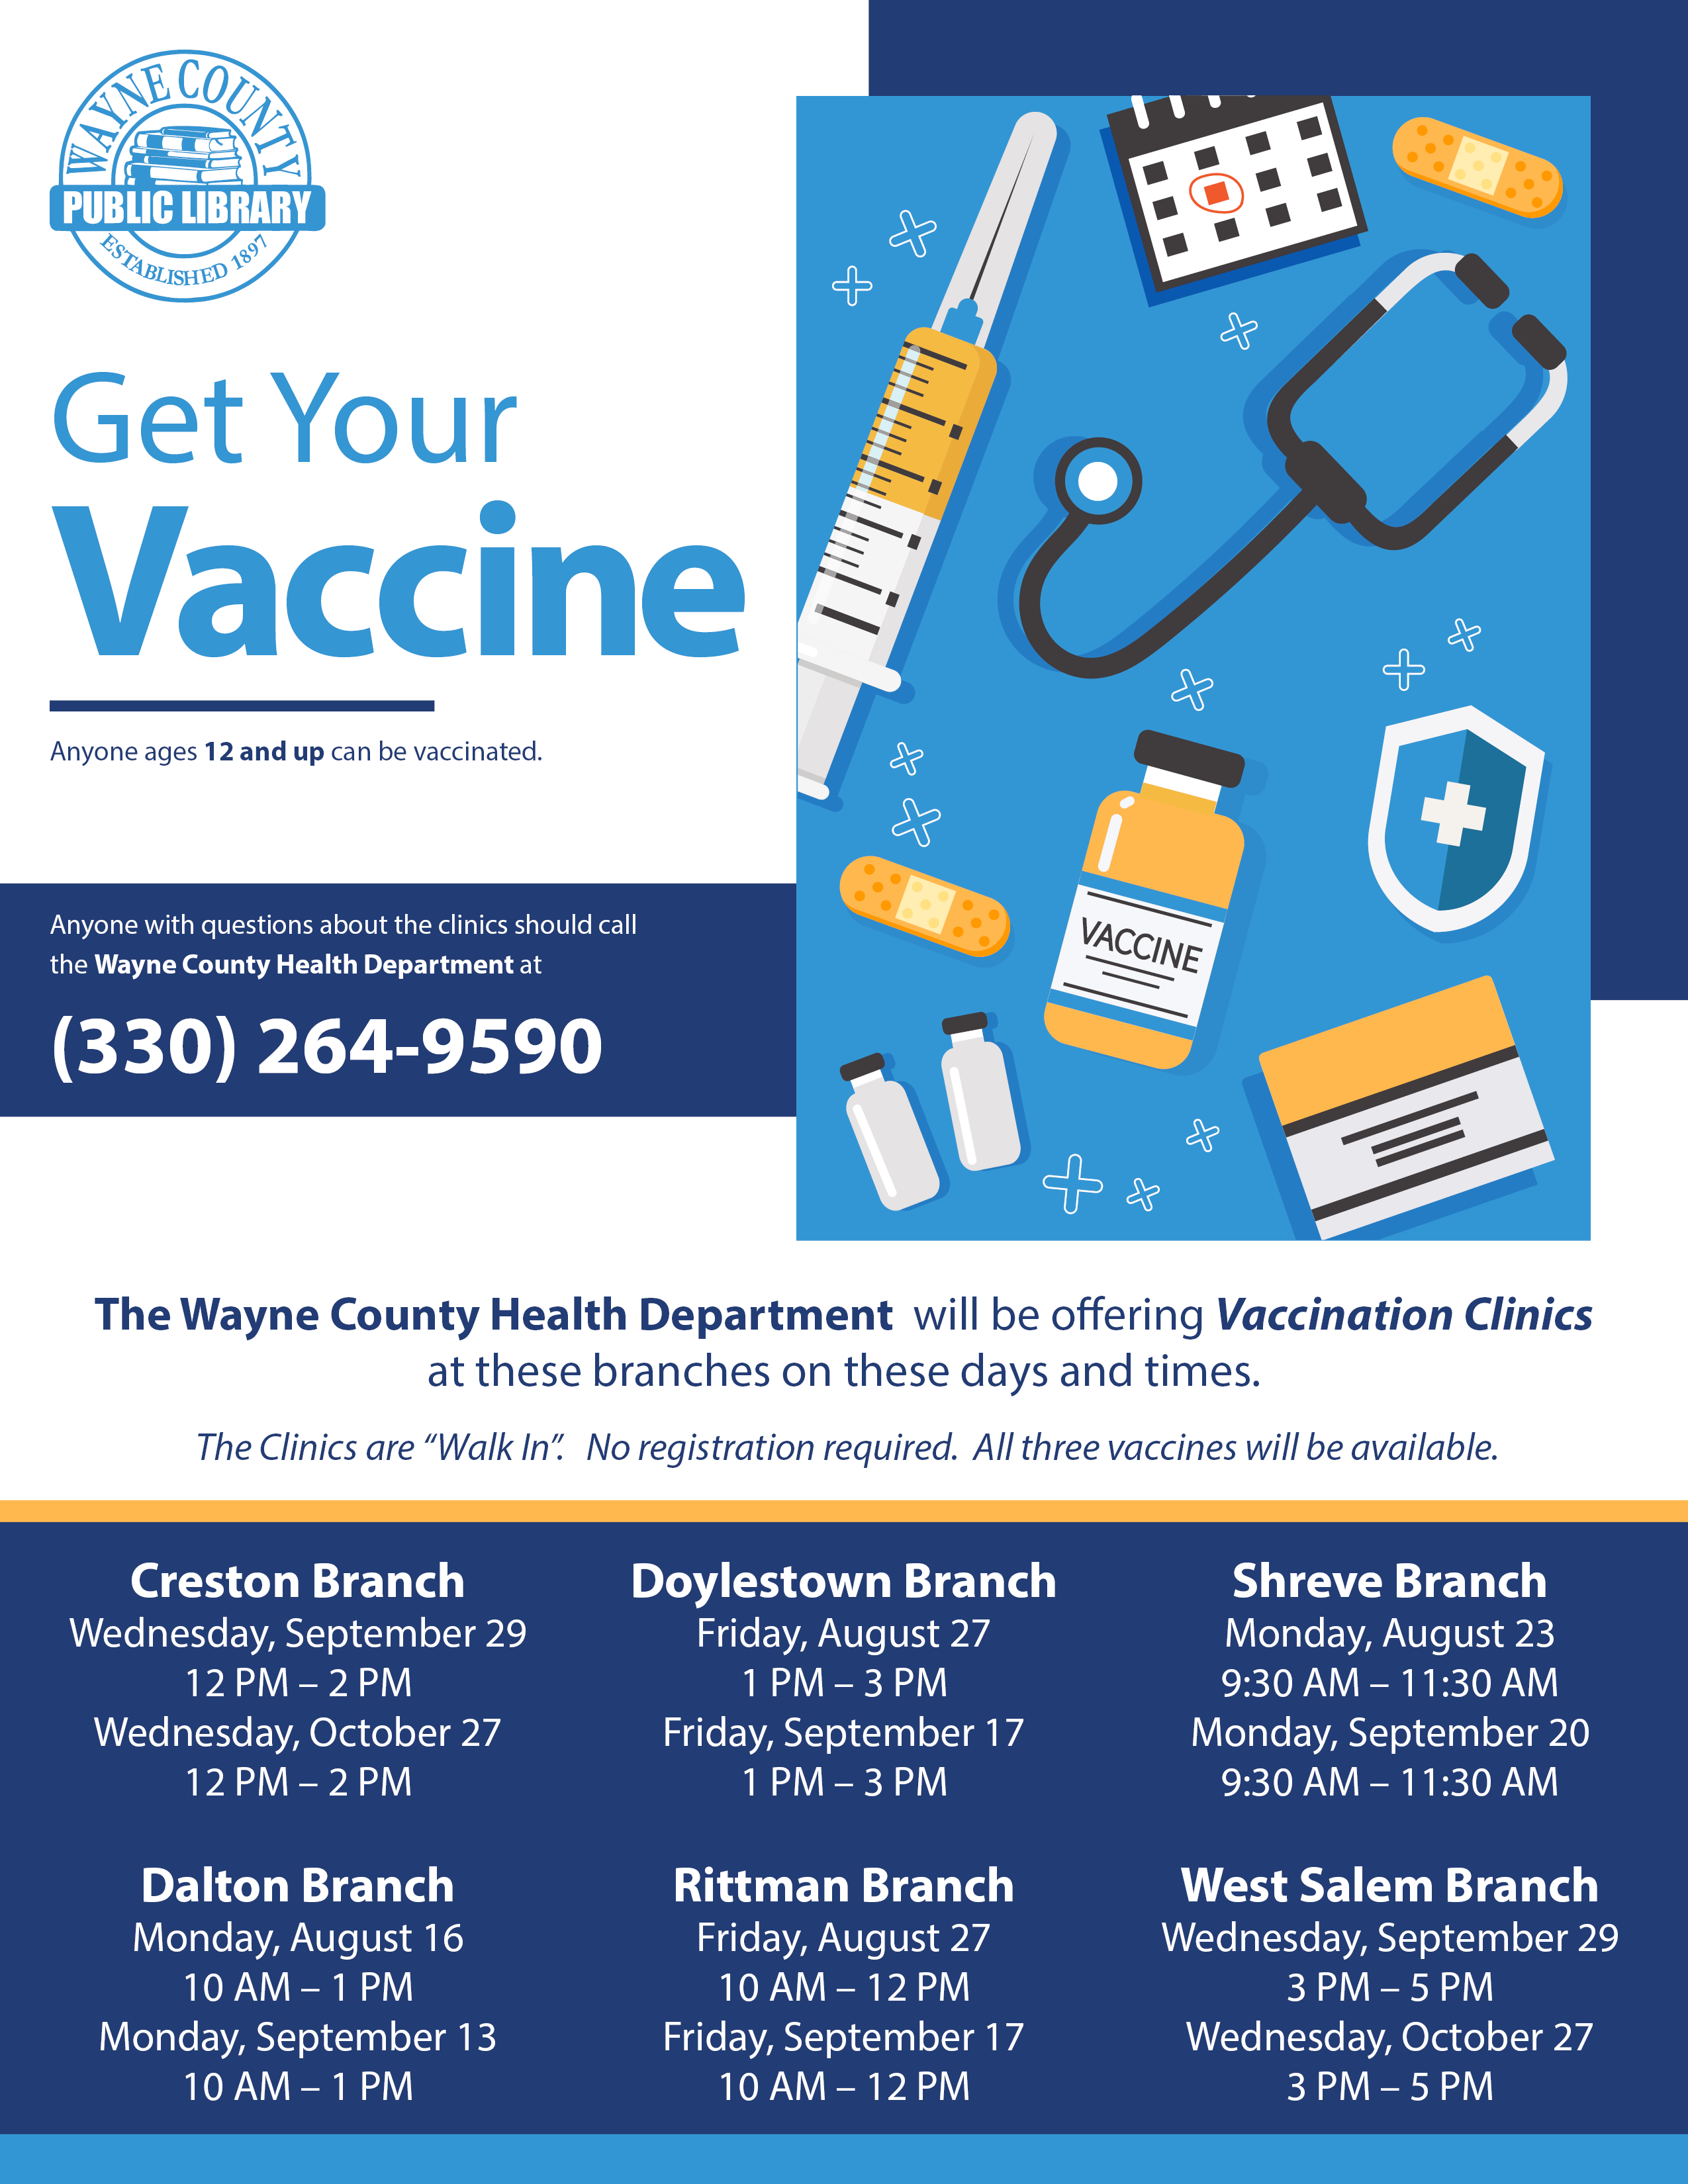 Get Your Vaccine at WCPL